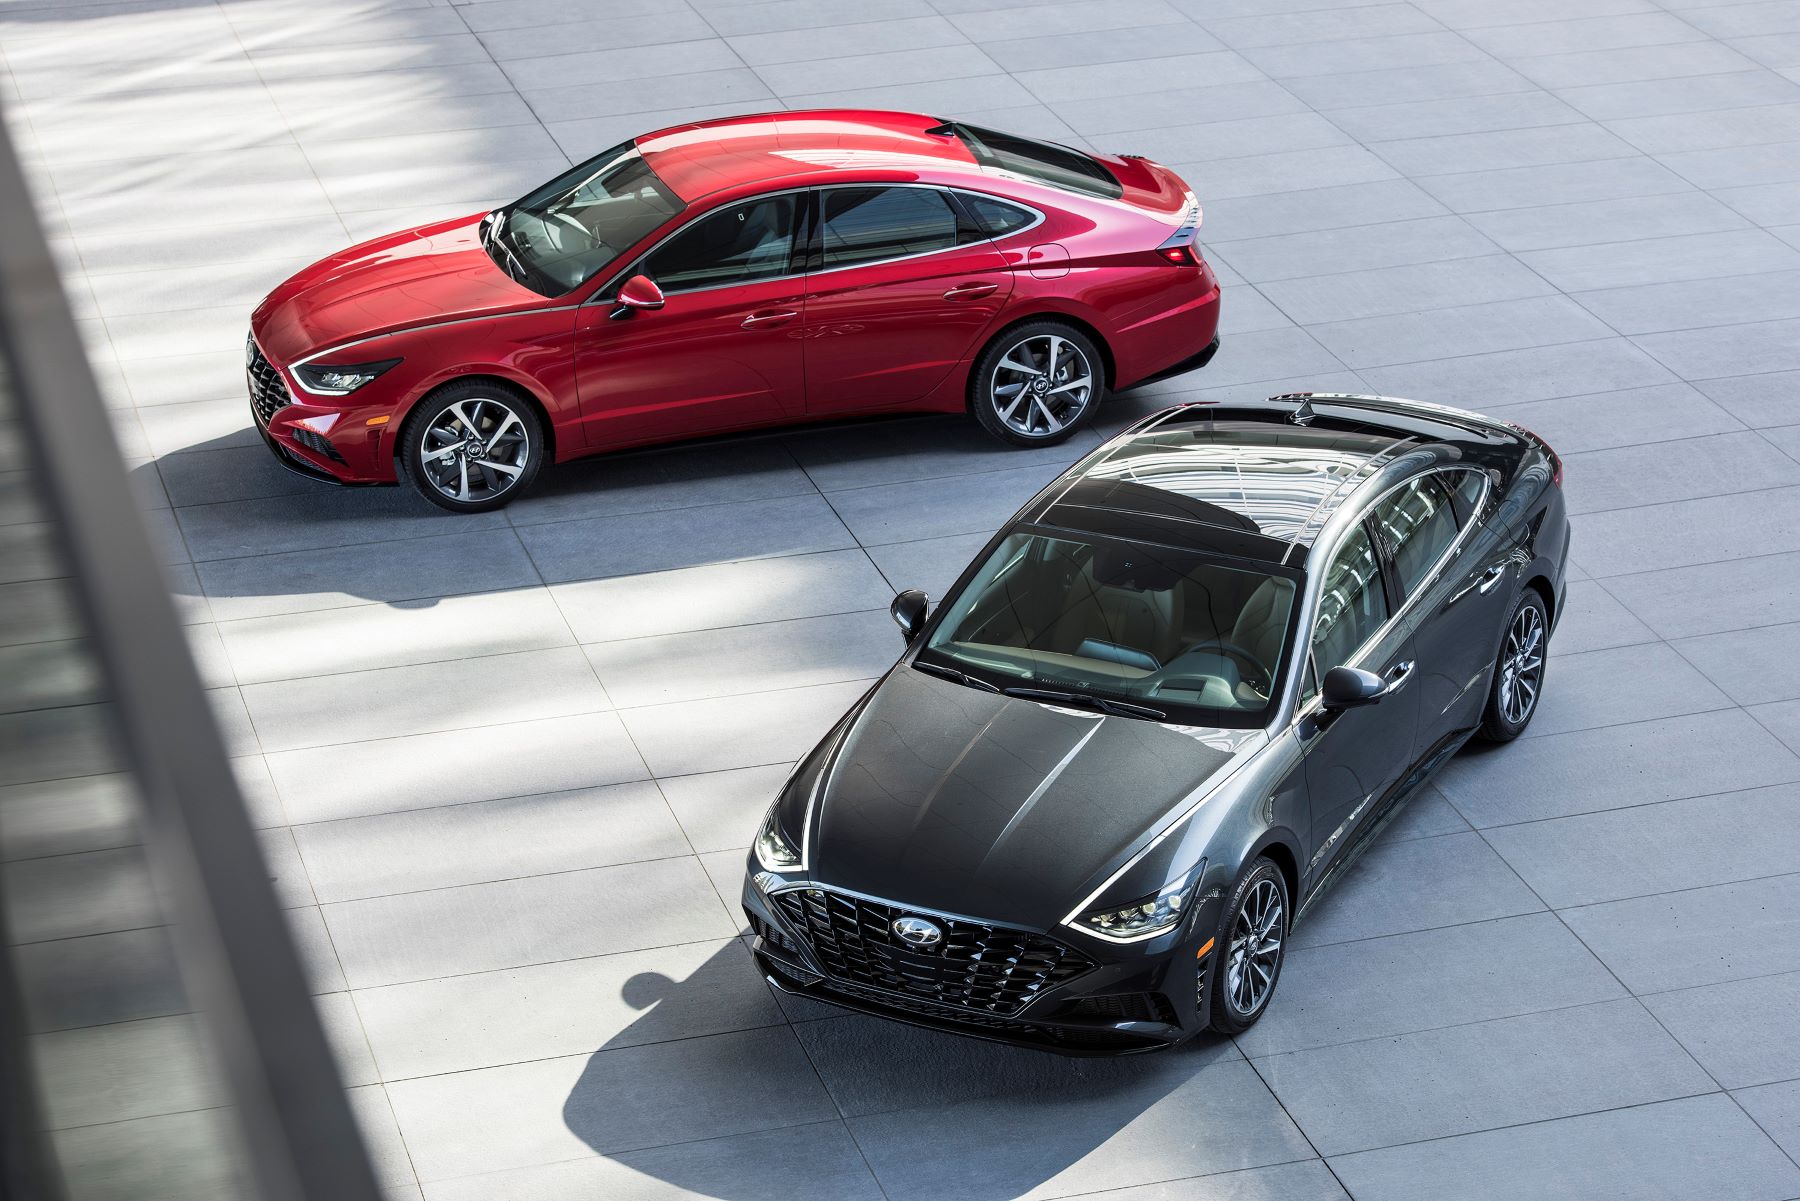 An overhead shot of 2022 Hyundai Sonata models in red and black parked on a slate plaza